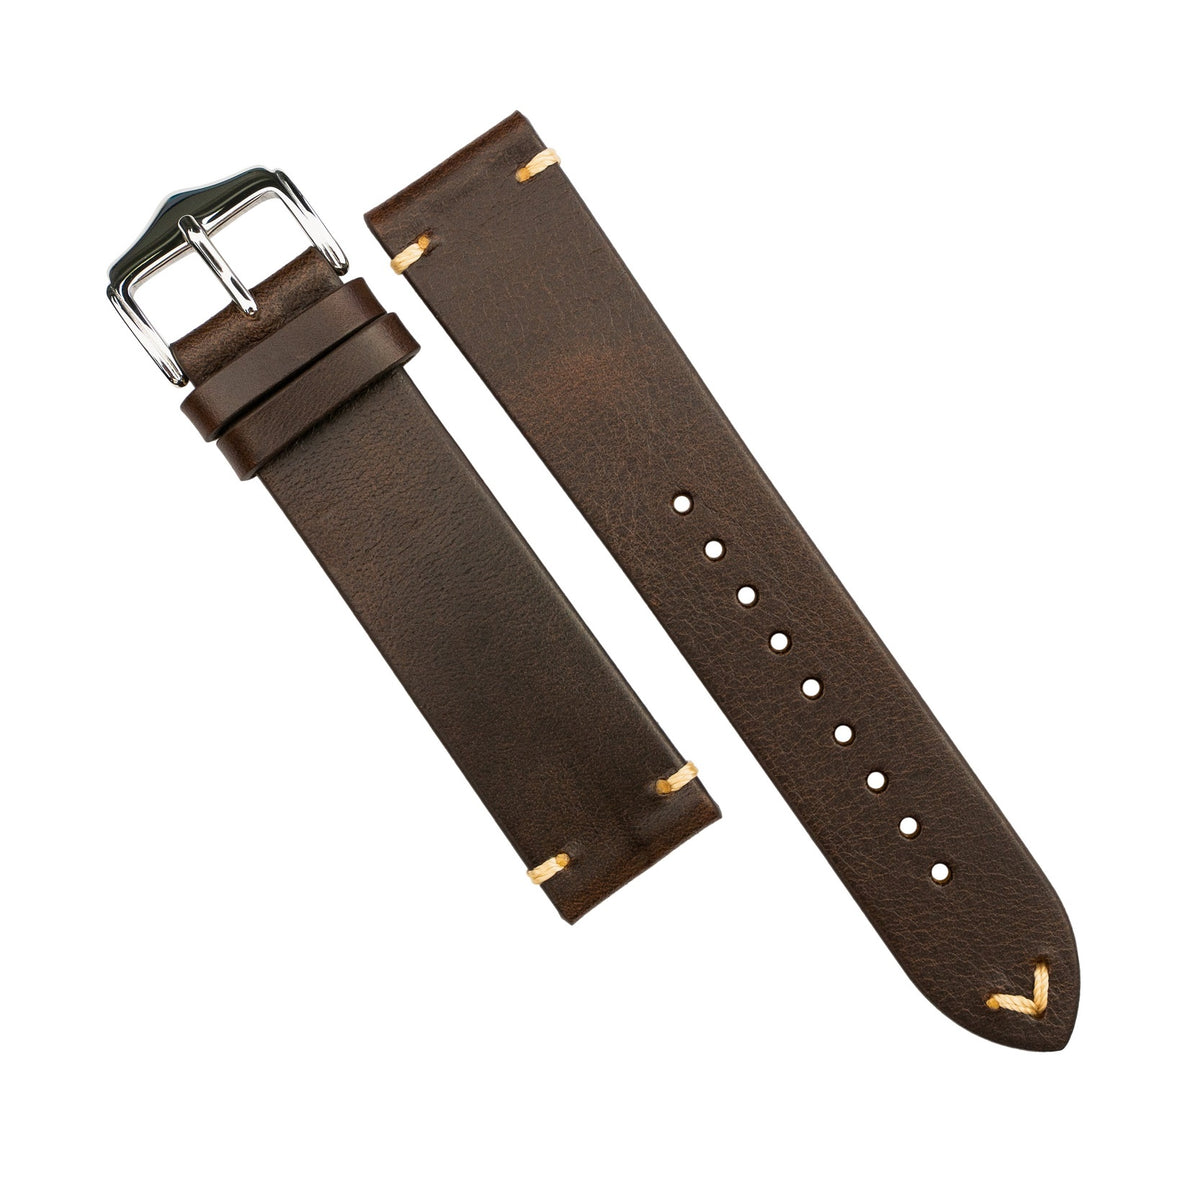 Premium Vintage Oil Waxed Leather Watch Strap in Brown (18mm) - Nomad Watch Works SG